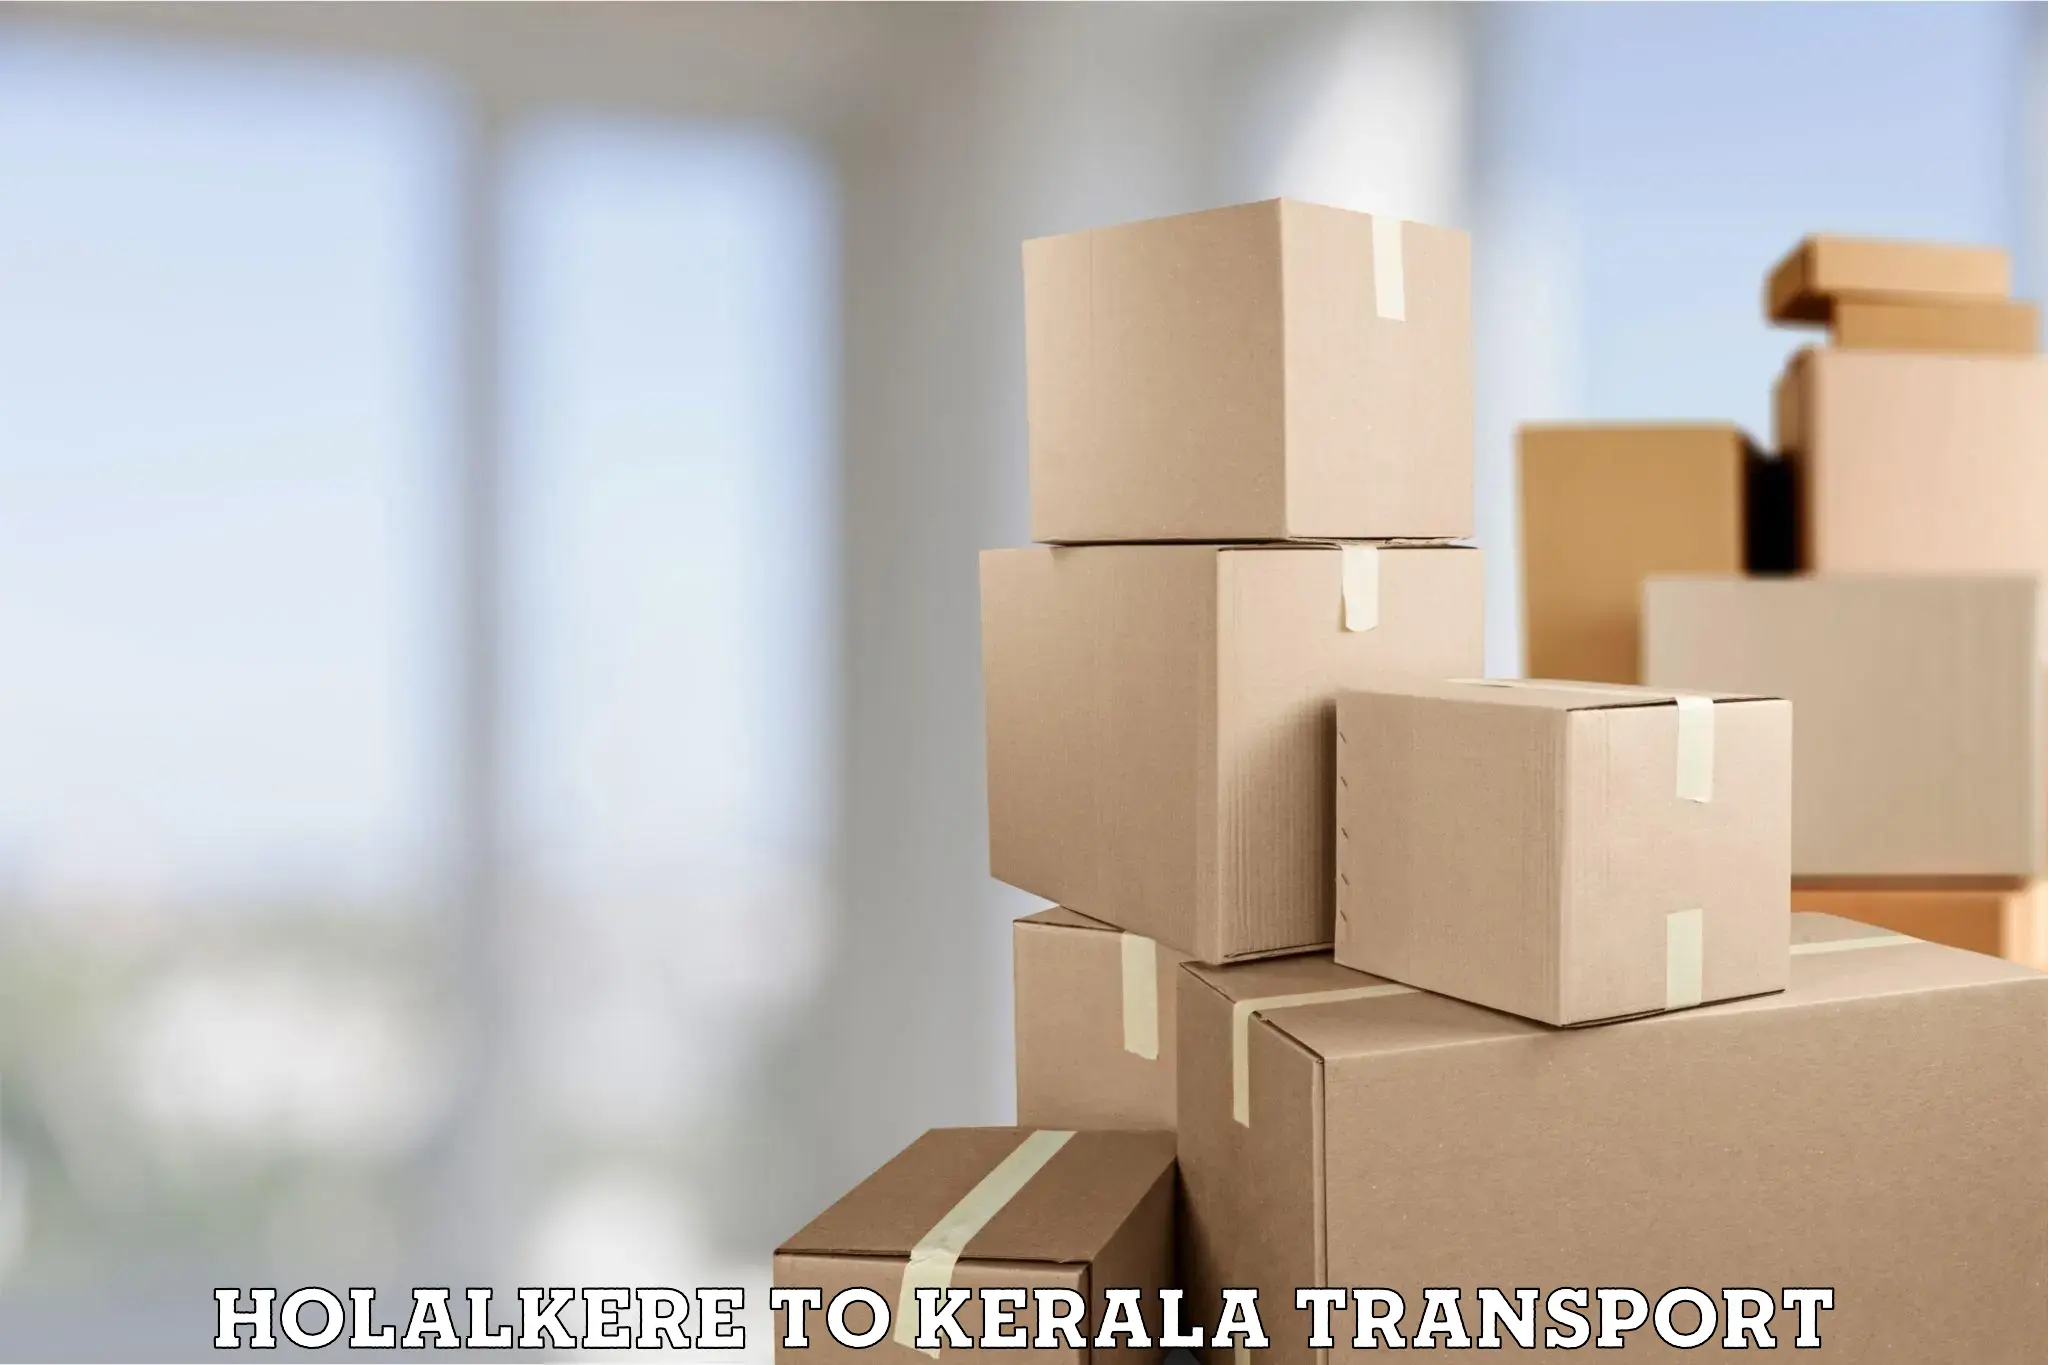 Container transport service Holalkere to Pala